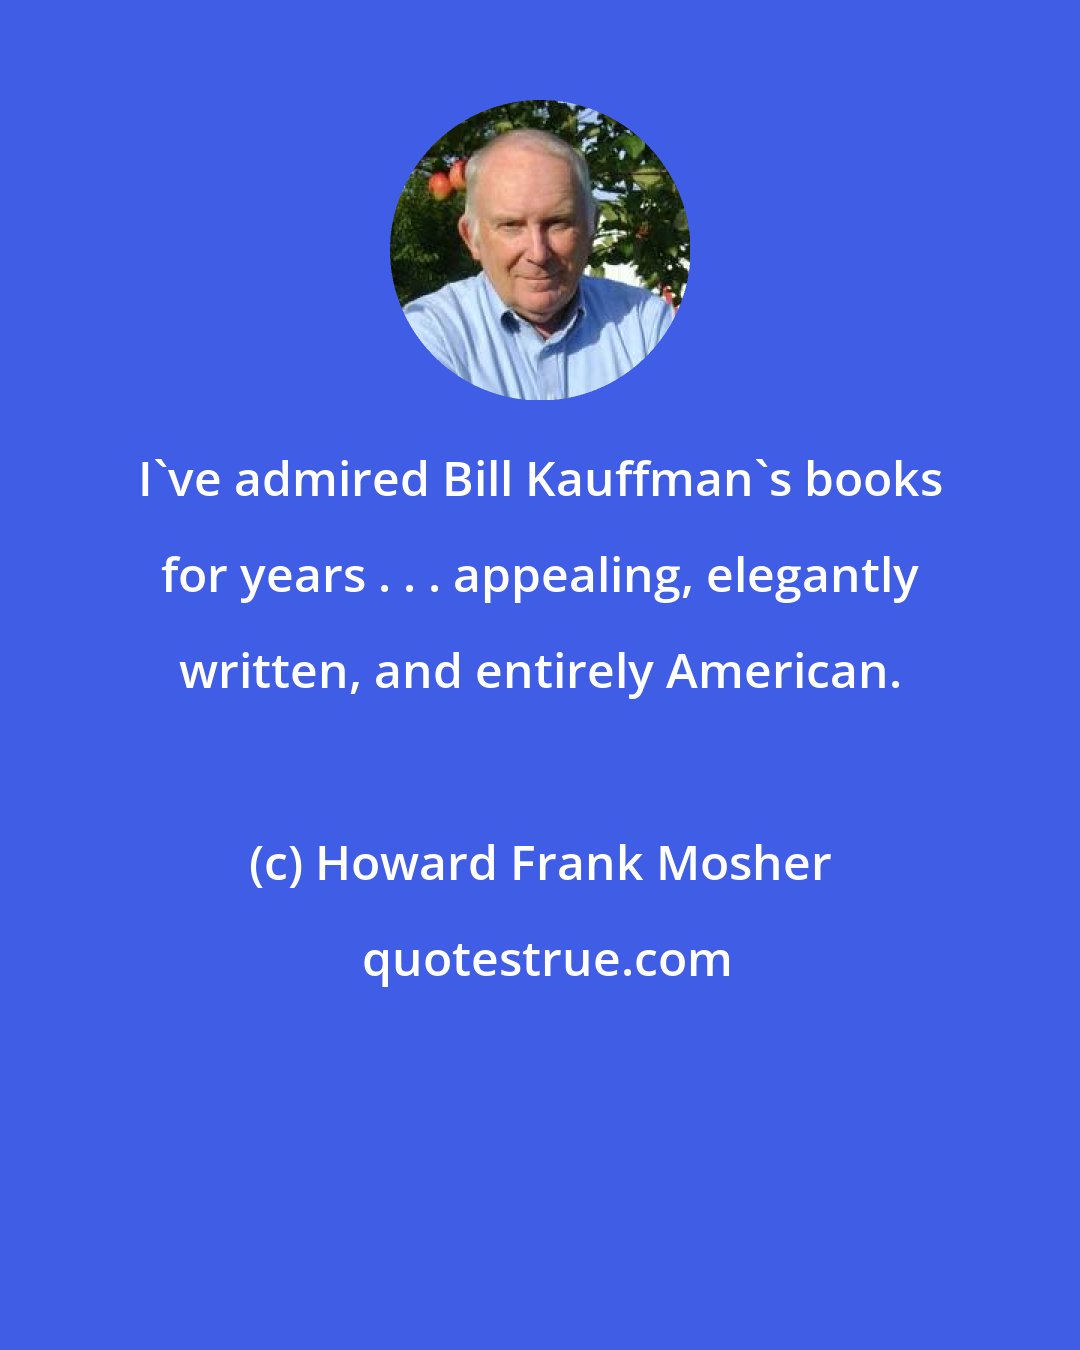 Howard Frank Mosher: I've admired Bill Kauffman's books for years . . . appealing, elegantly written, and entirely American.